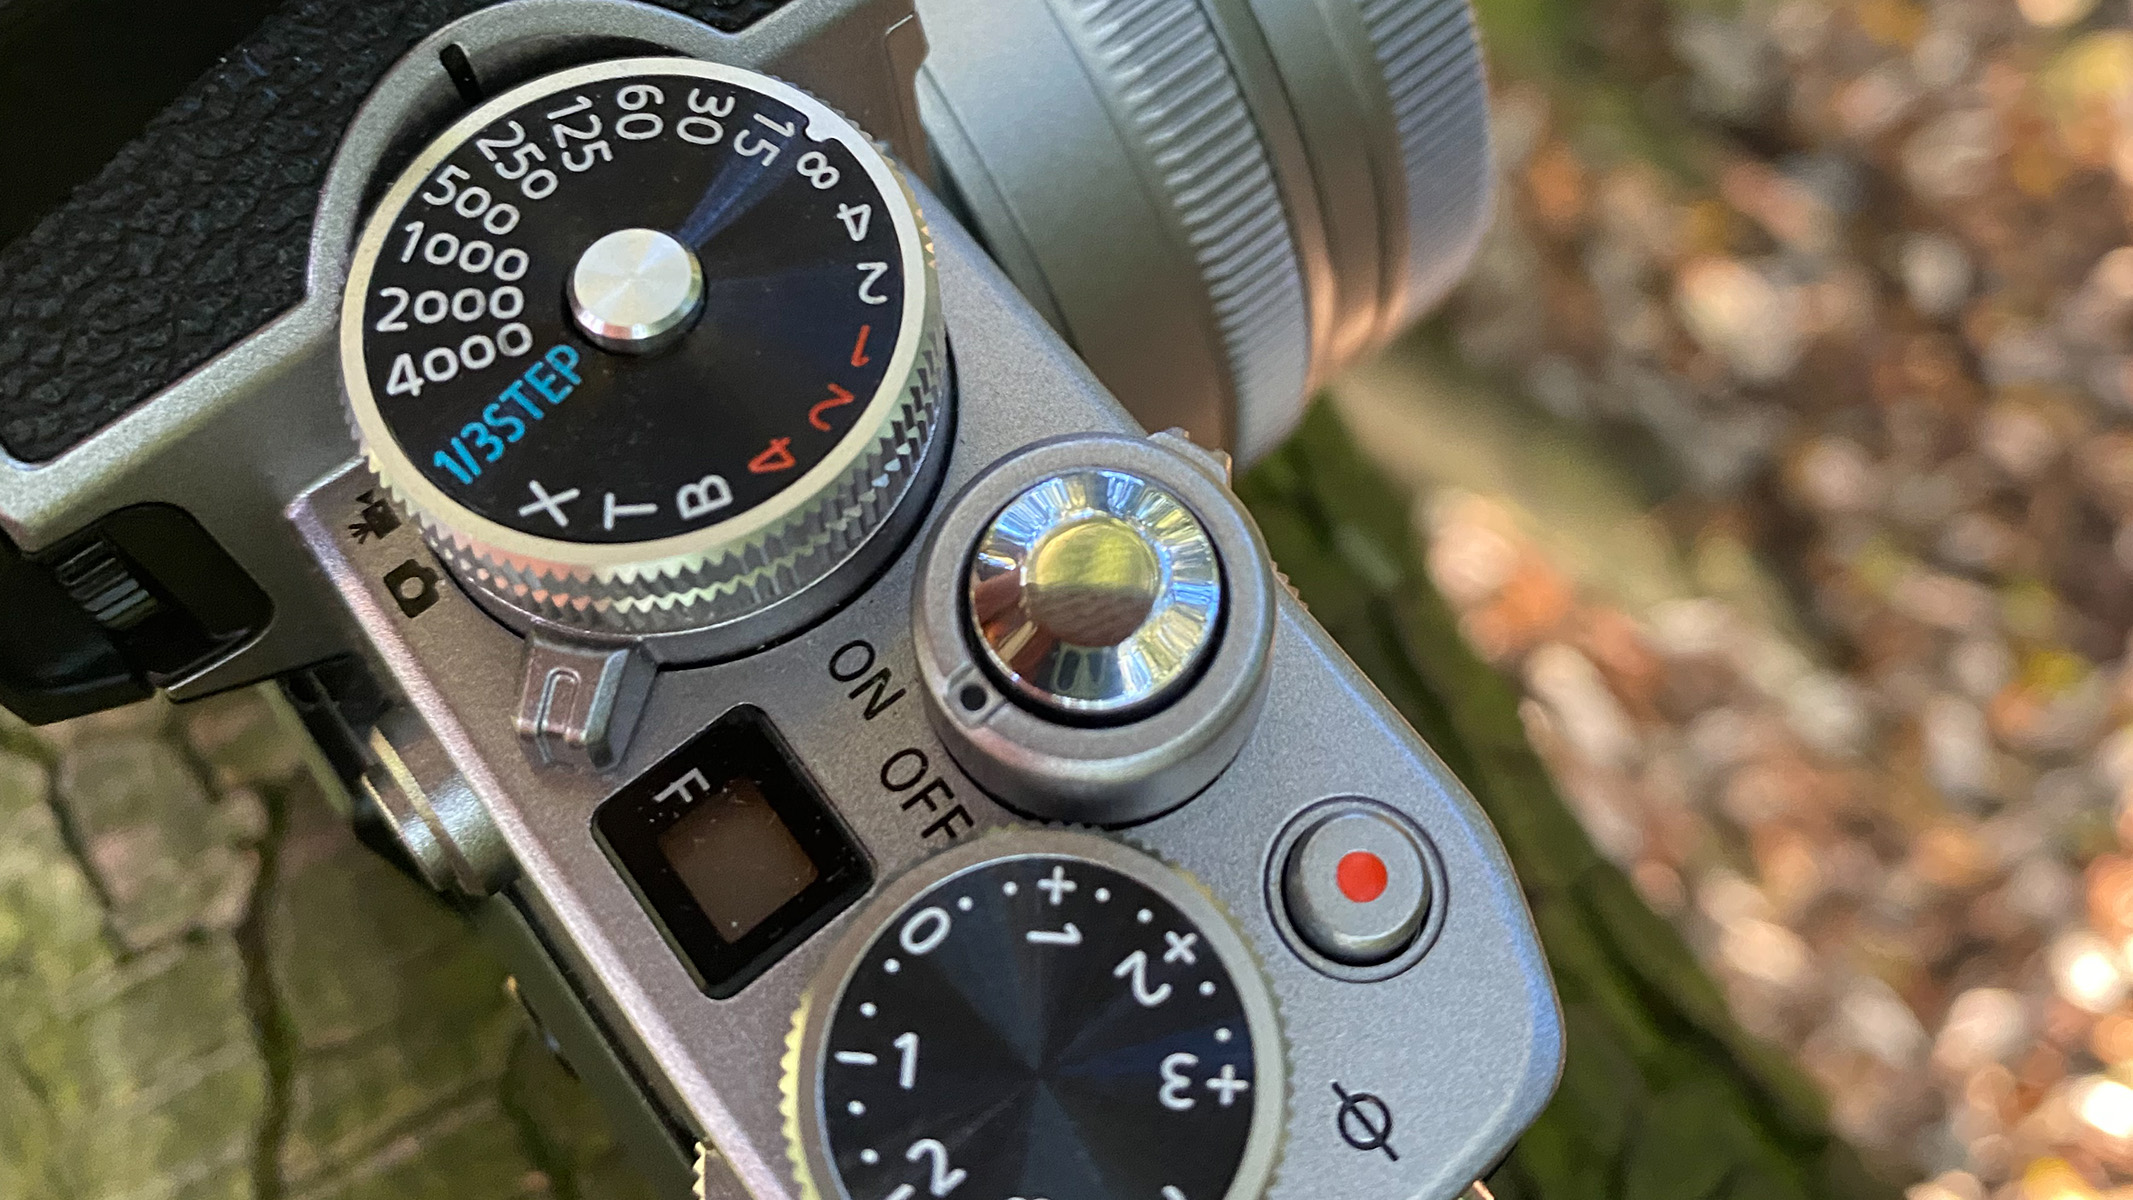 Image shows the dials on the Nikon Z fc